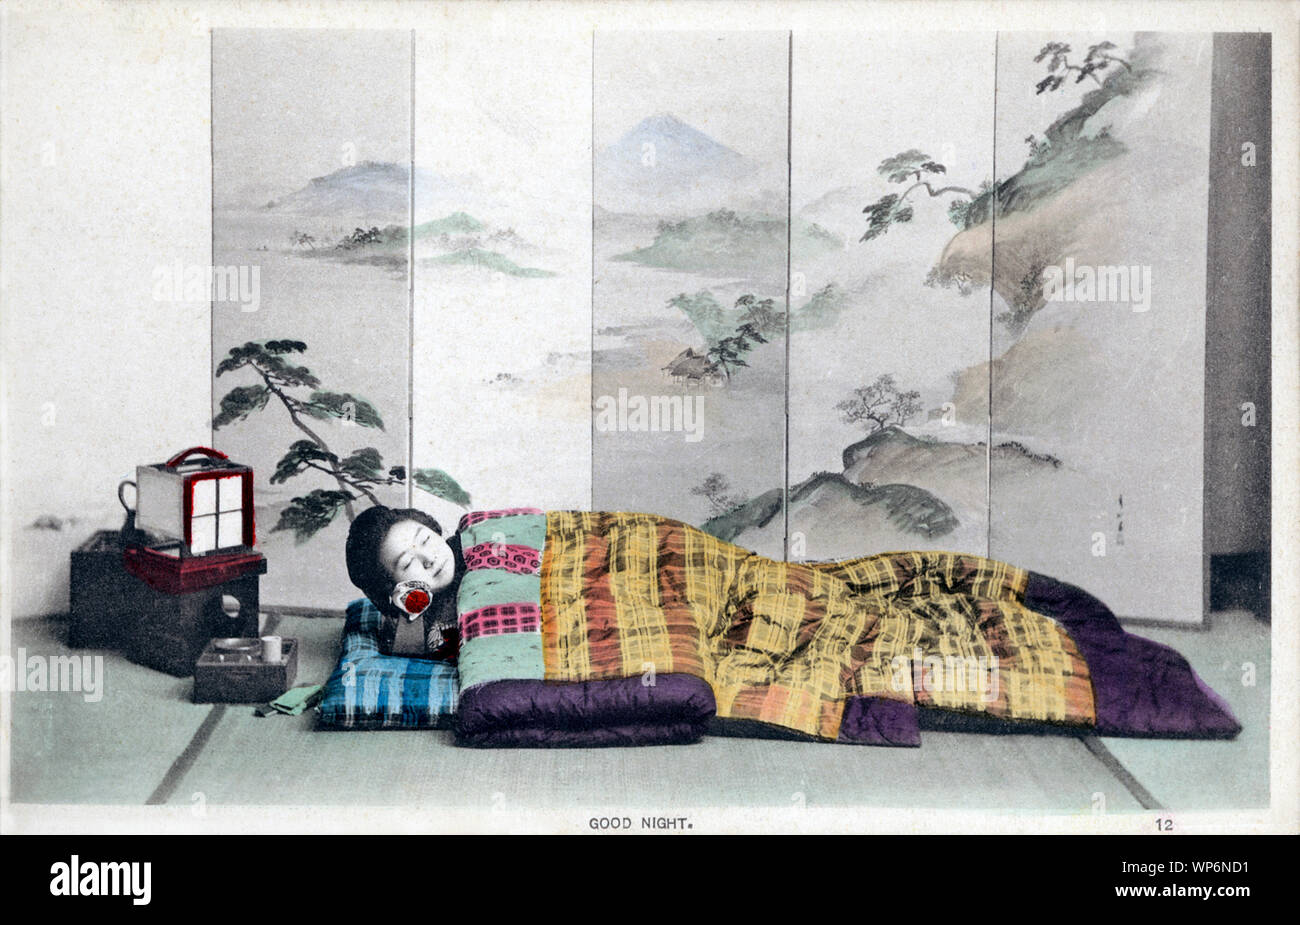 [ 1900s Japan - Japanese Woman Sleeping ] —   A day in the life of a young Japanese woman during the Meiji and Taisho Periods in the early 20th century:  12. GOOD NIGHT.  20th century vintage postcard. Stock Photo